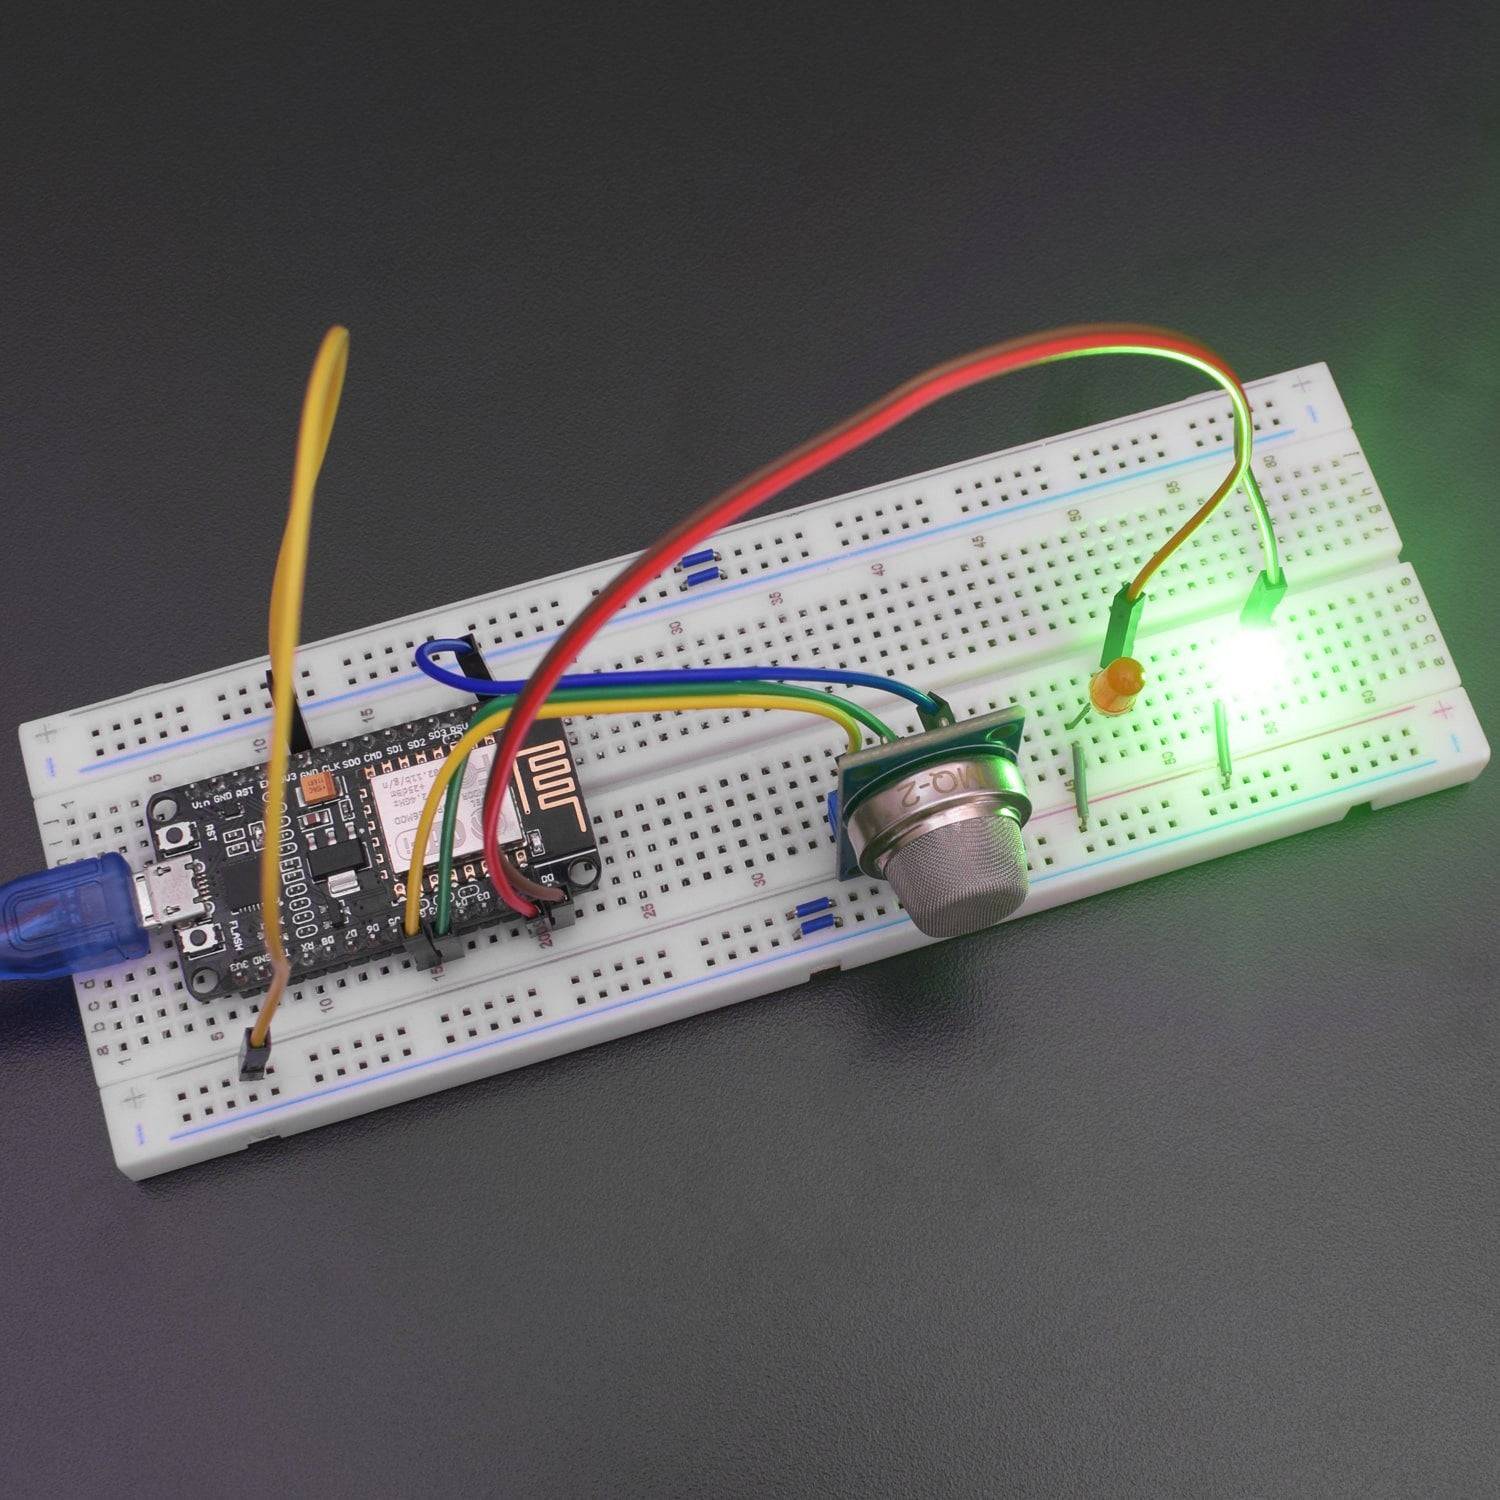 Make an IoT based Gas level controlling system using MQ-2 Gas Sensor module and led with NodeMCU ESP8266-12e Board - KT566 - REES52